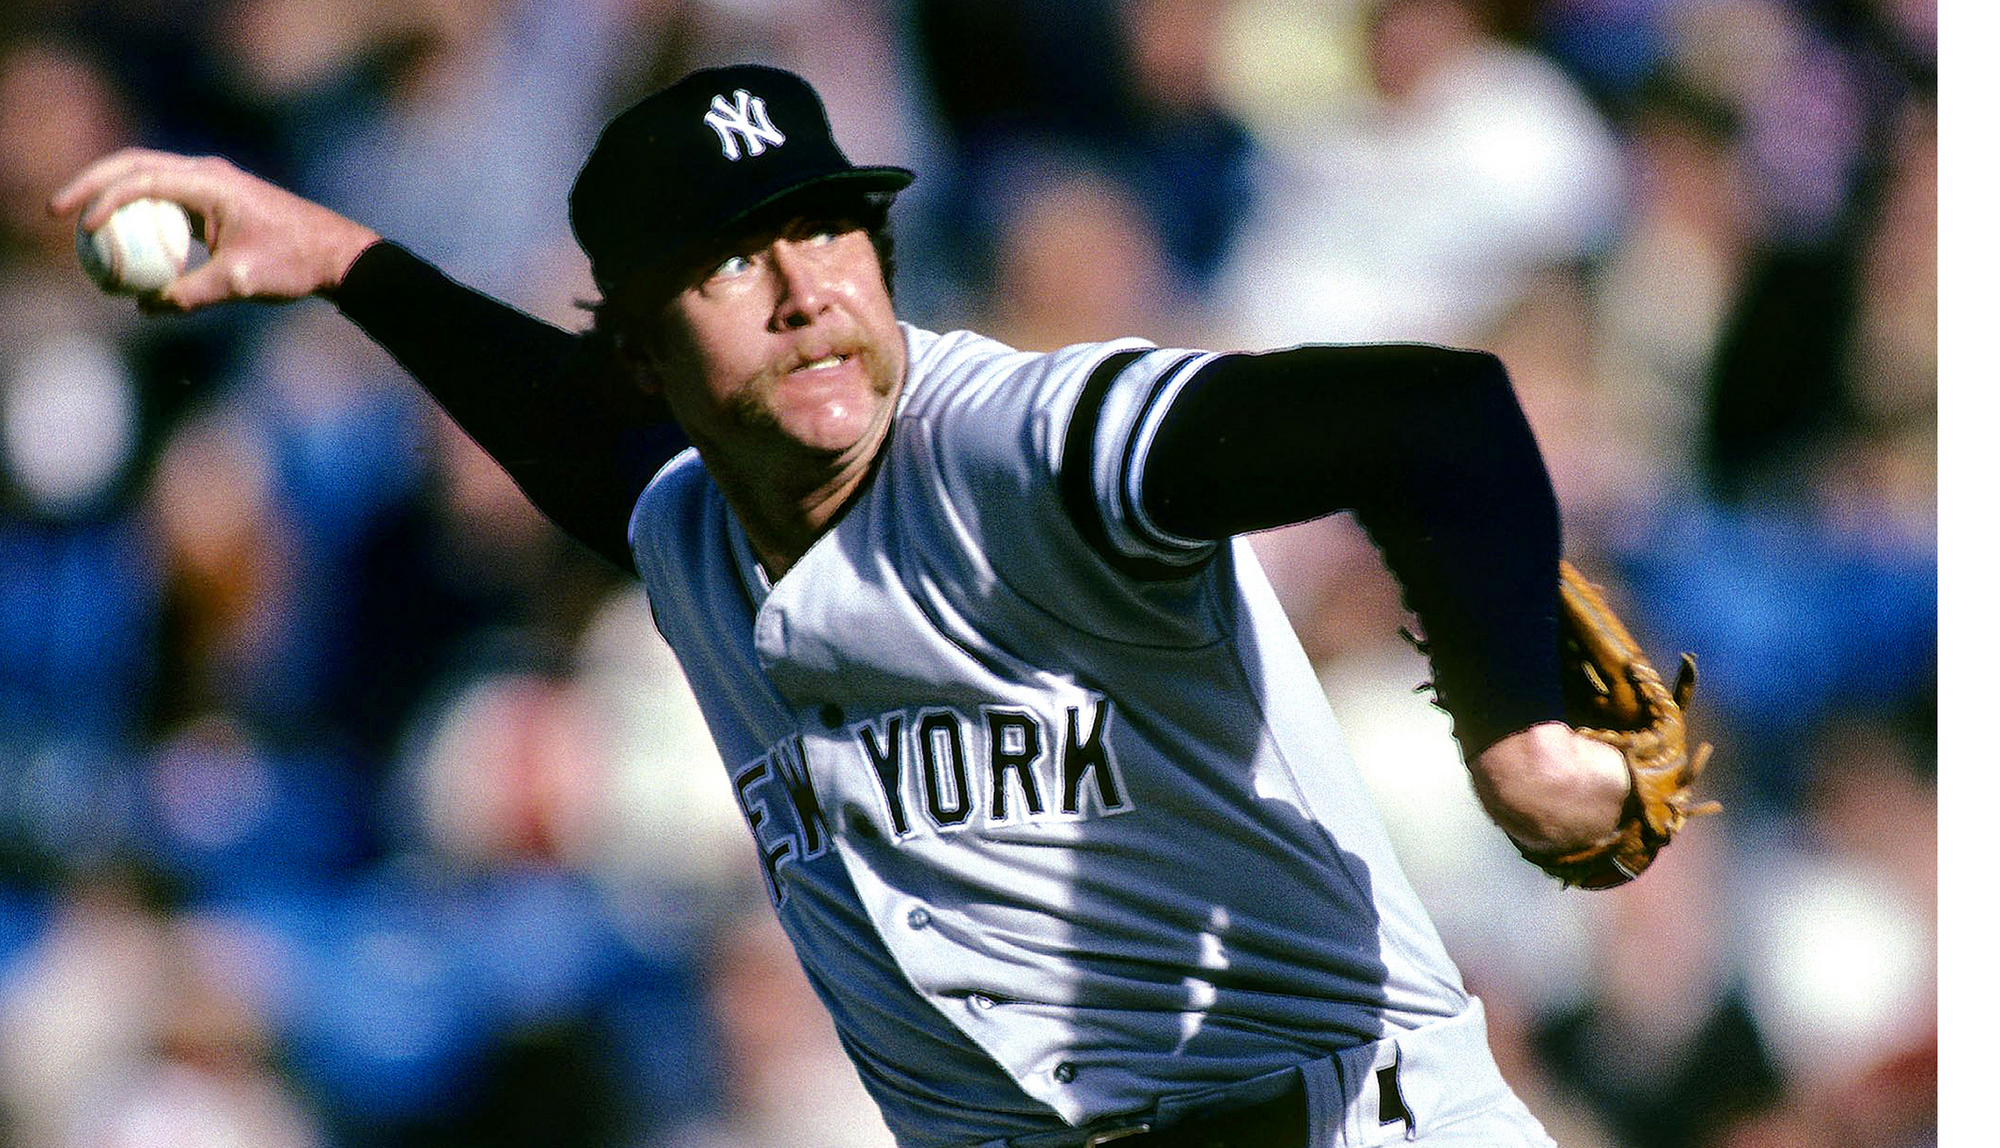 Goose Gossage's 22 year ride in the major leagues